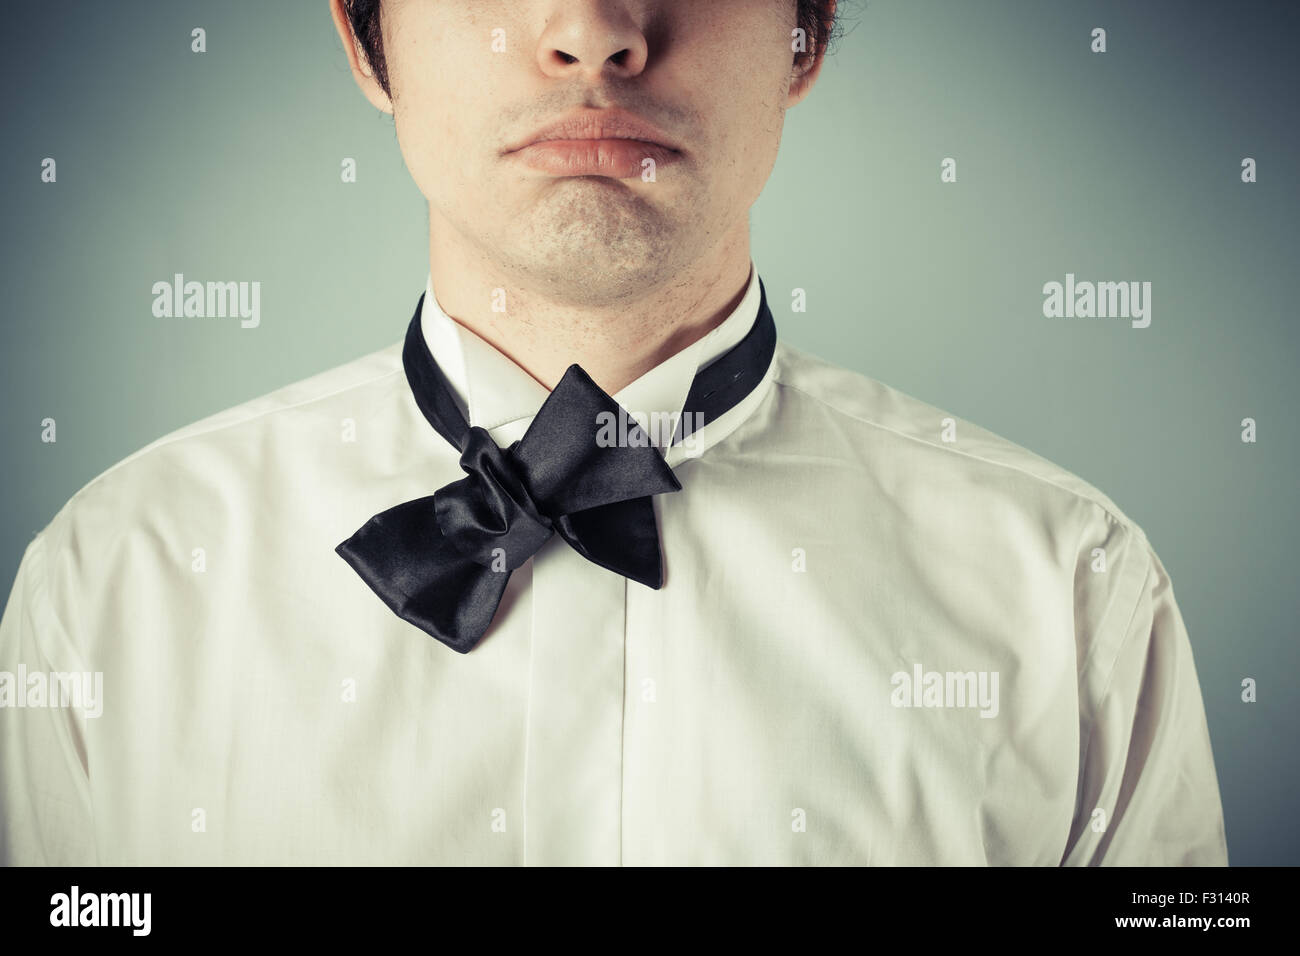 Young man does not know how to tie a bow tie Stock Photo